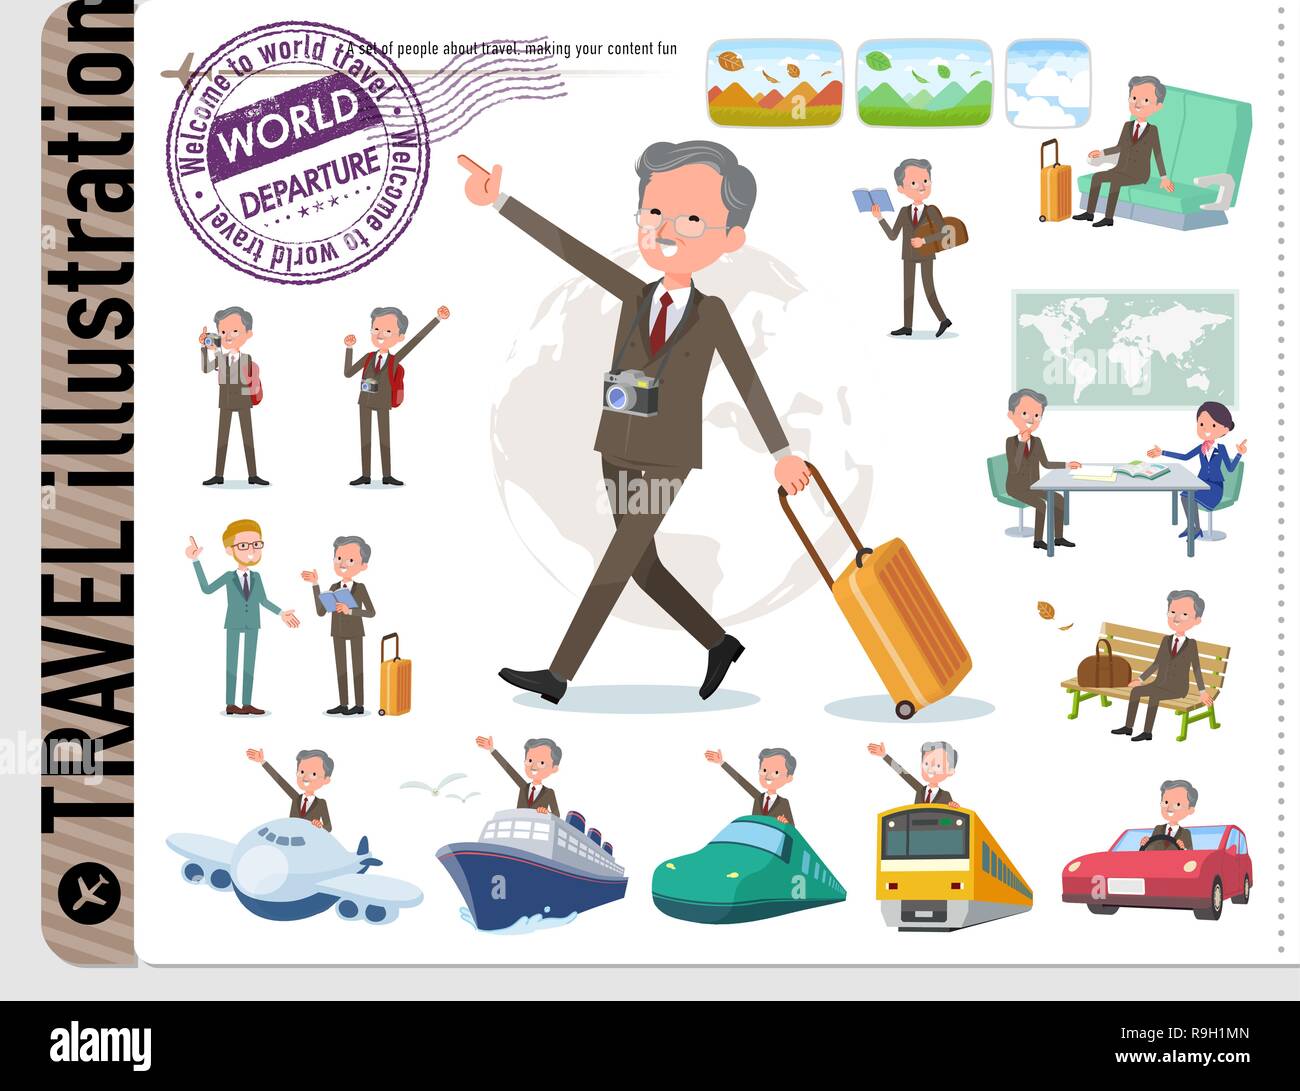 A set of old businessman on travel.There are also vehicles such as boats and airplanes.It's vector art so it's easy to edit. Stock Vector